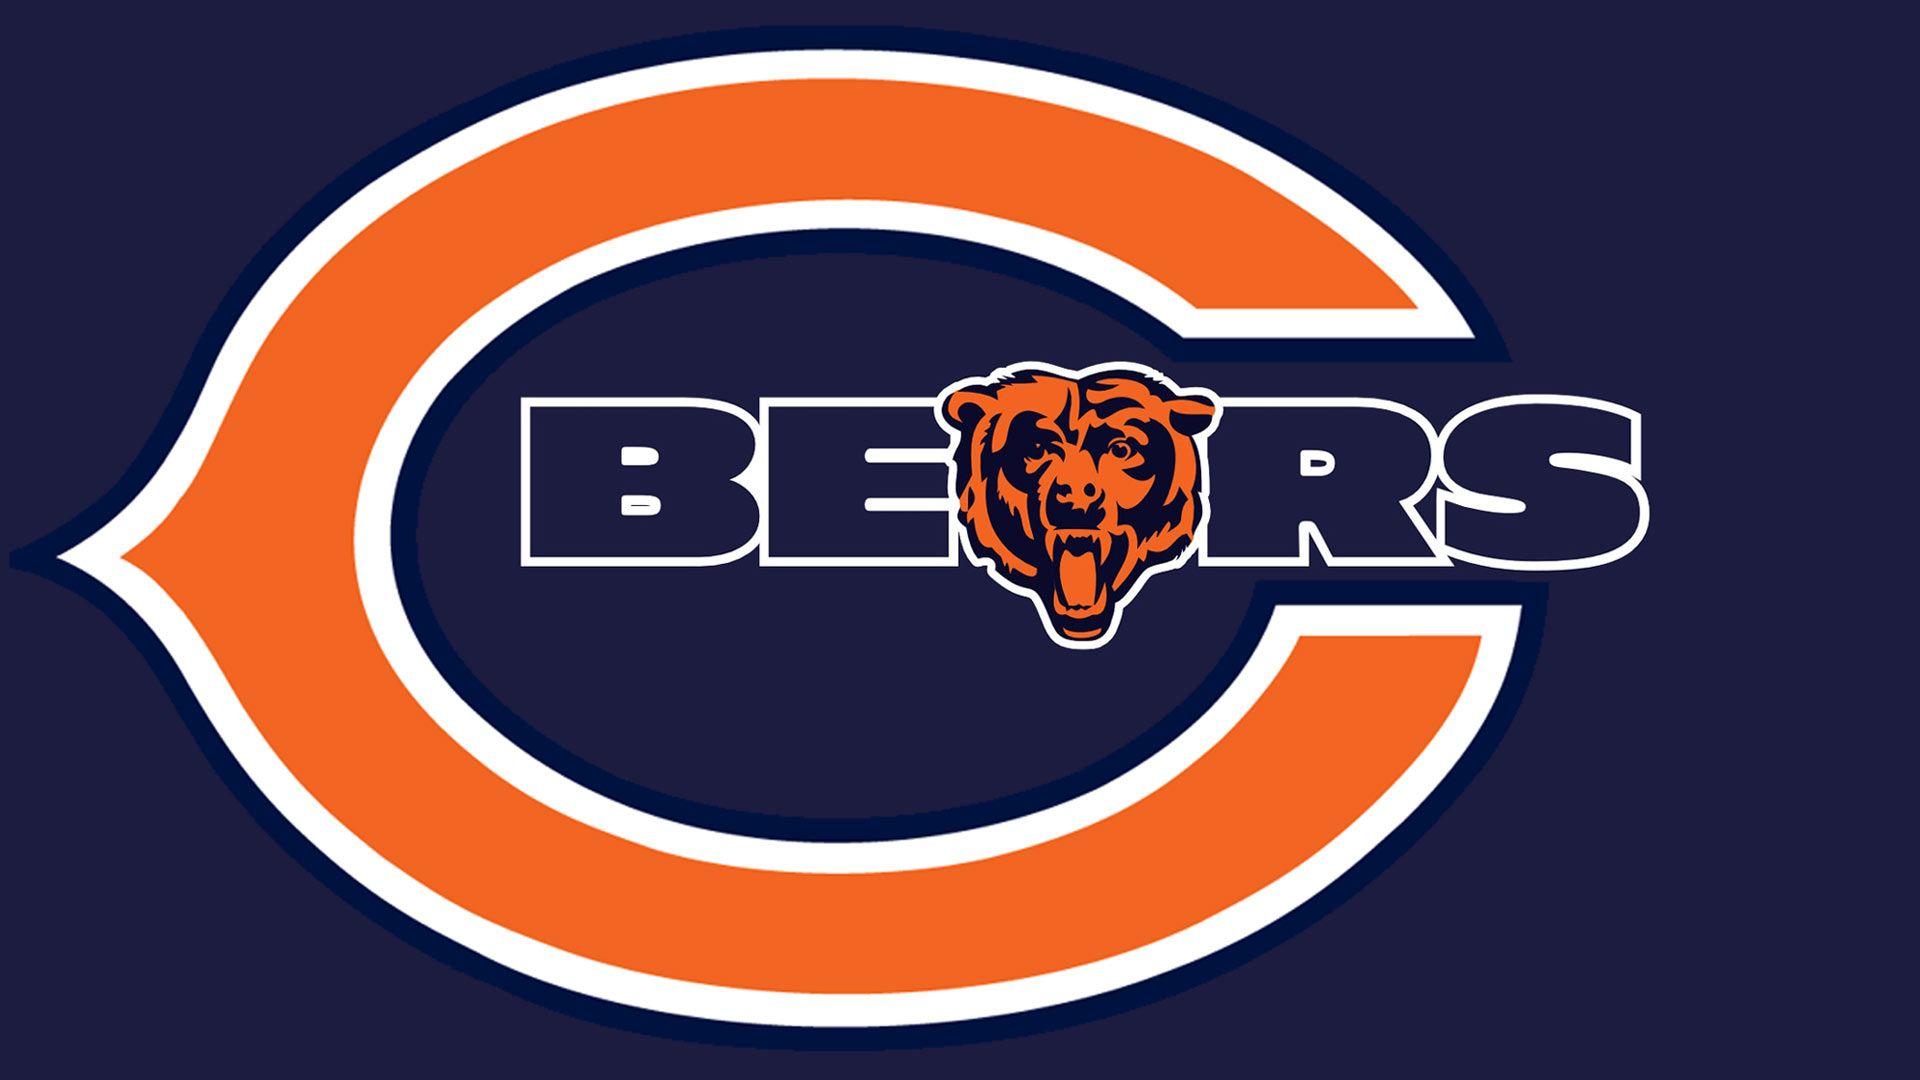 Chicago Bears 2018 Wallpapers - Wallpaper Cave